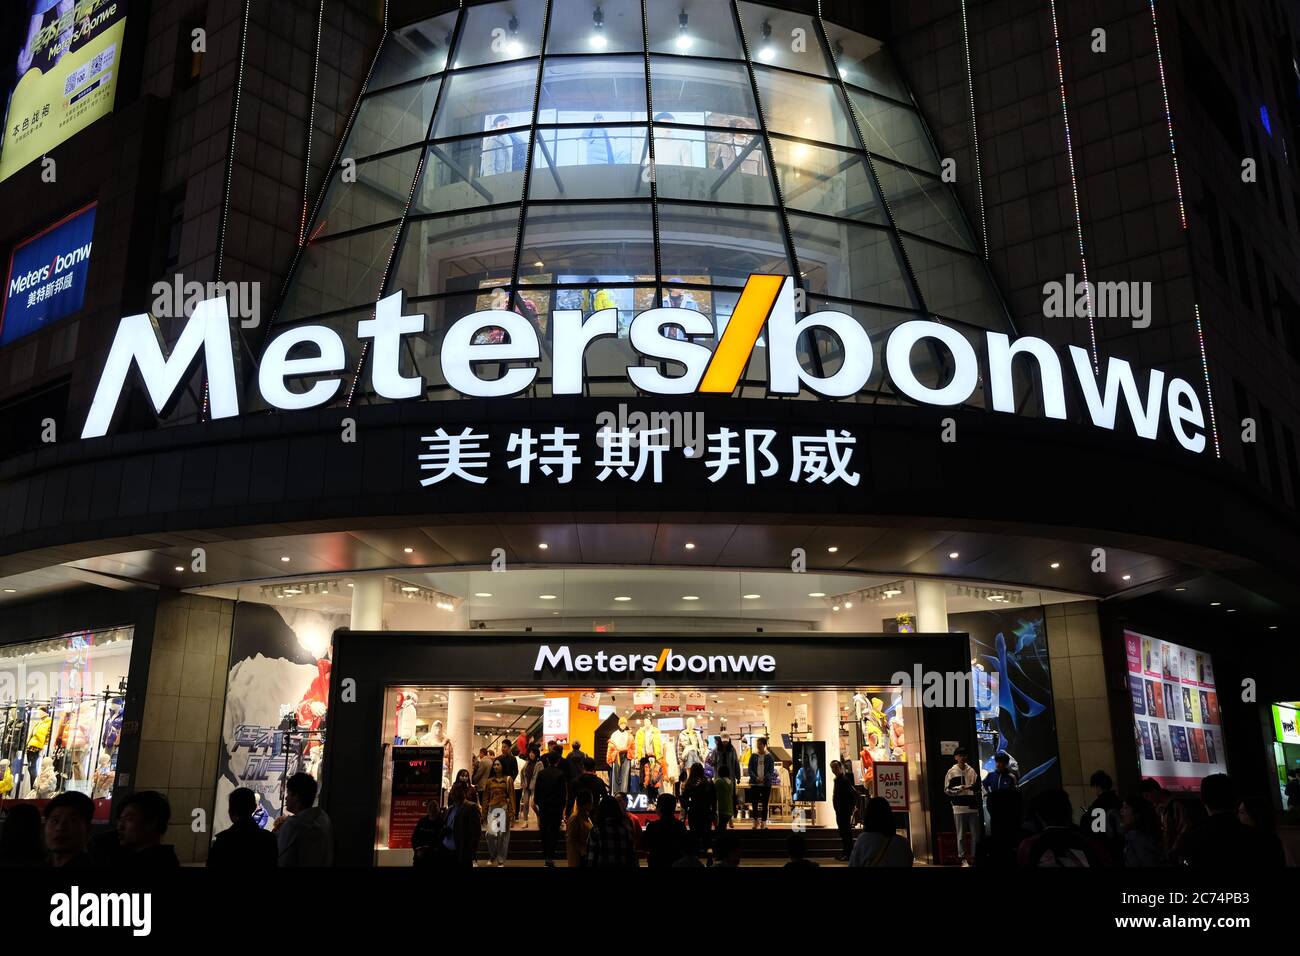 facade of Metersbonwe flagship store on Nanjing Road. Bright white shop sign. Illuminated clothing store inside. A Chinese clothing brand Stock Photo